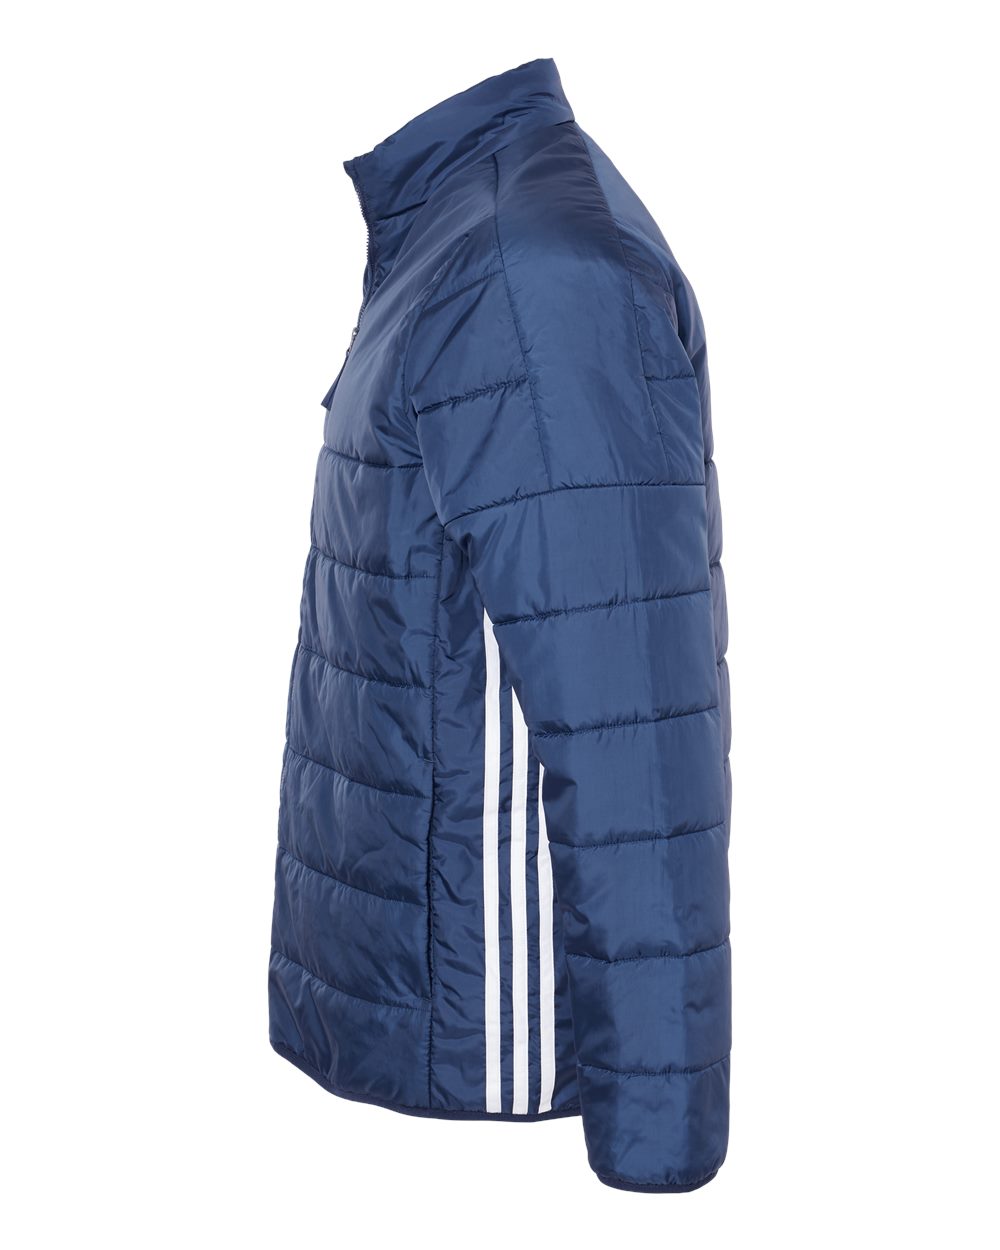 Adidas A570 Puffer Jacket #color_Team Navy Blue